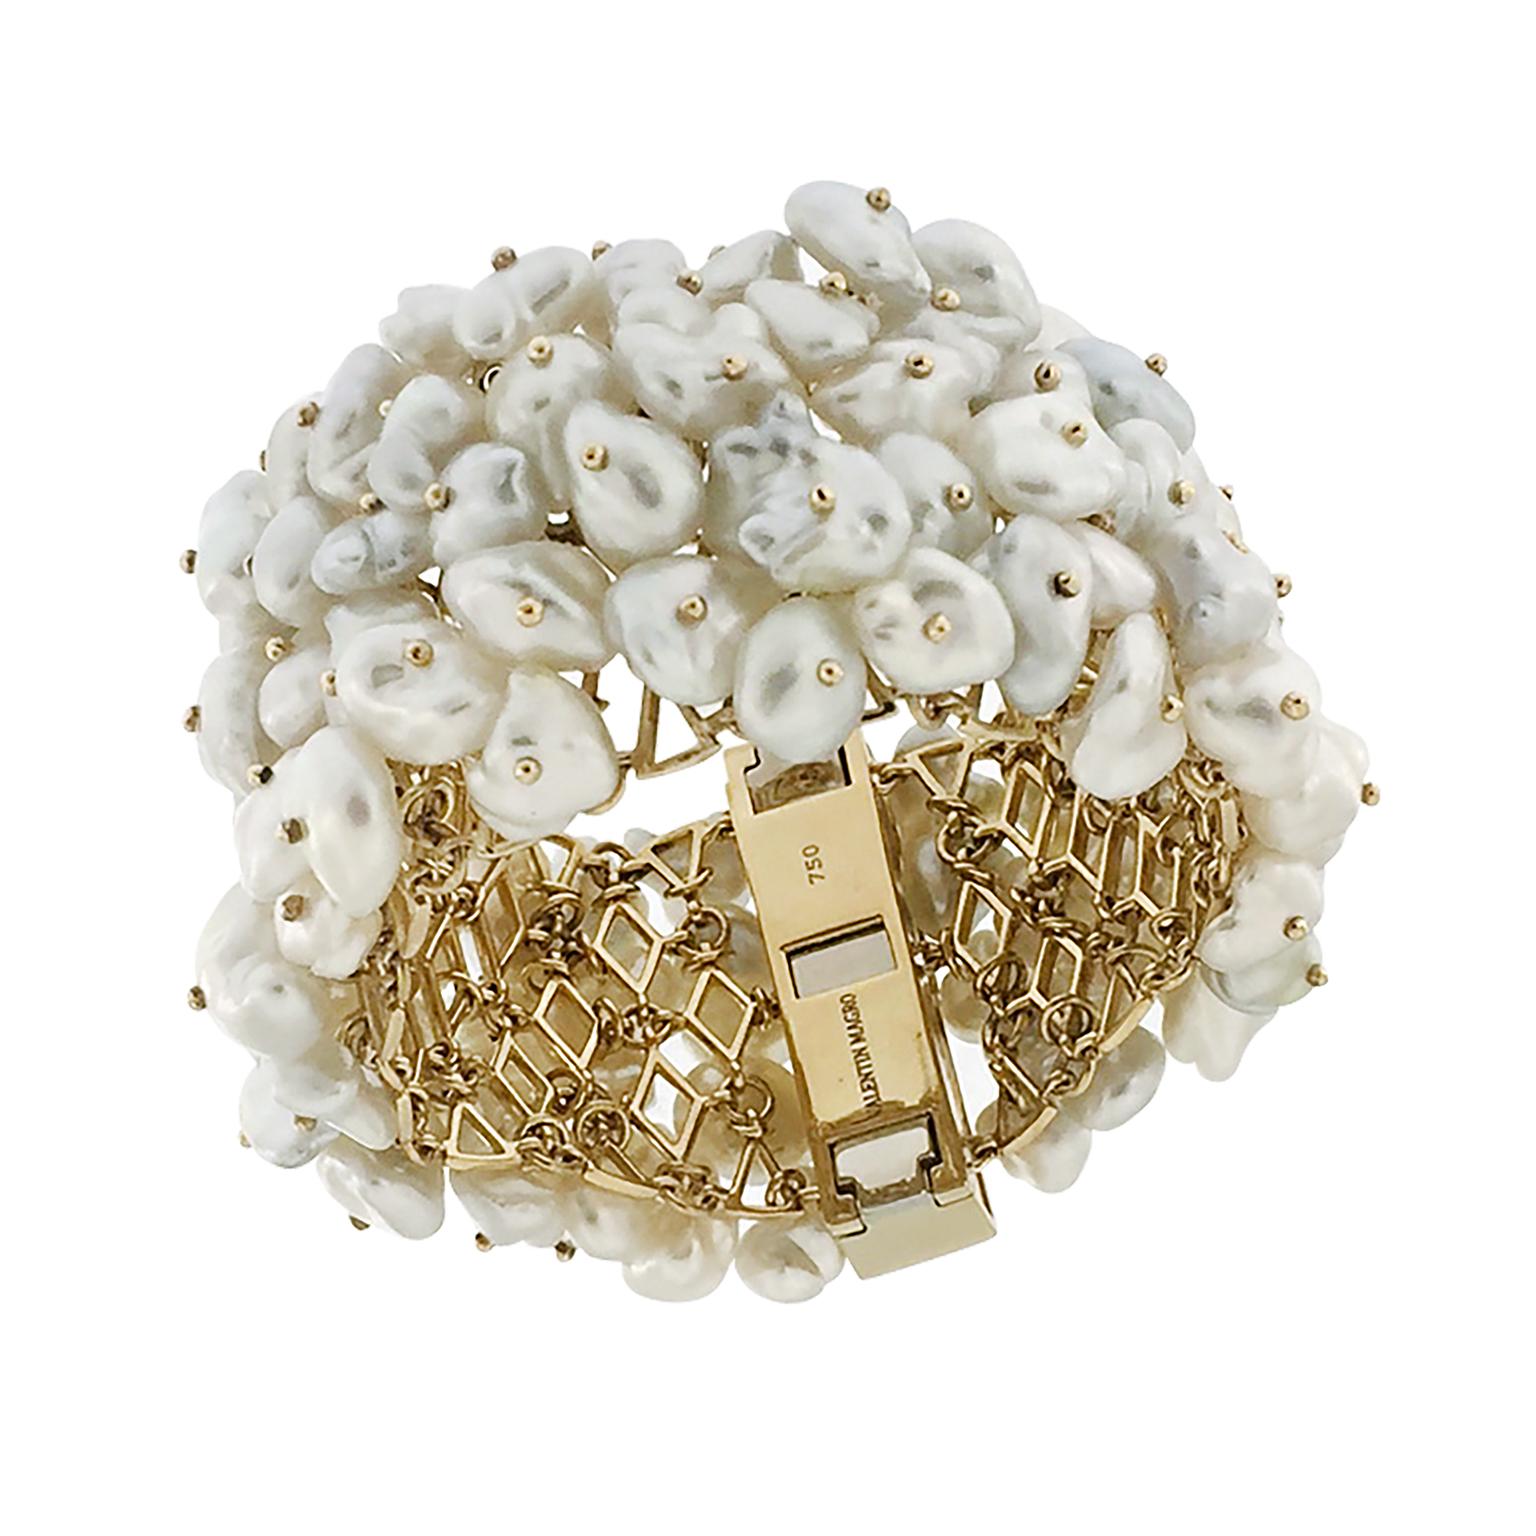 Valentin Magro Dangling White Keshi Pearl Bracelet is made of glossy hues. The 18k yellow gold body supports dozens of keshi pearls. These jewels are known for their irregular shapes and high amounts of nacre. Their play of light and shadow is